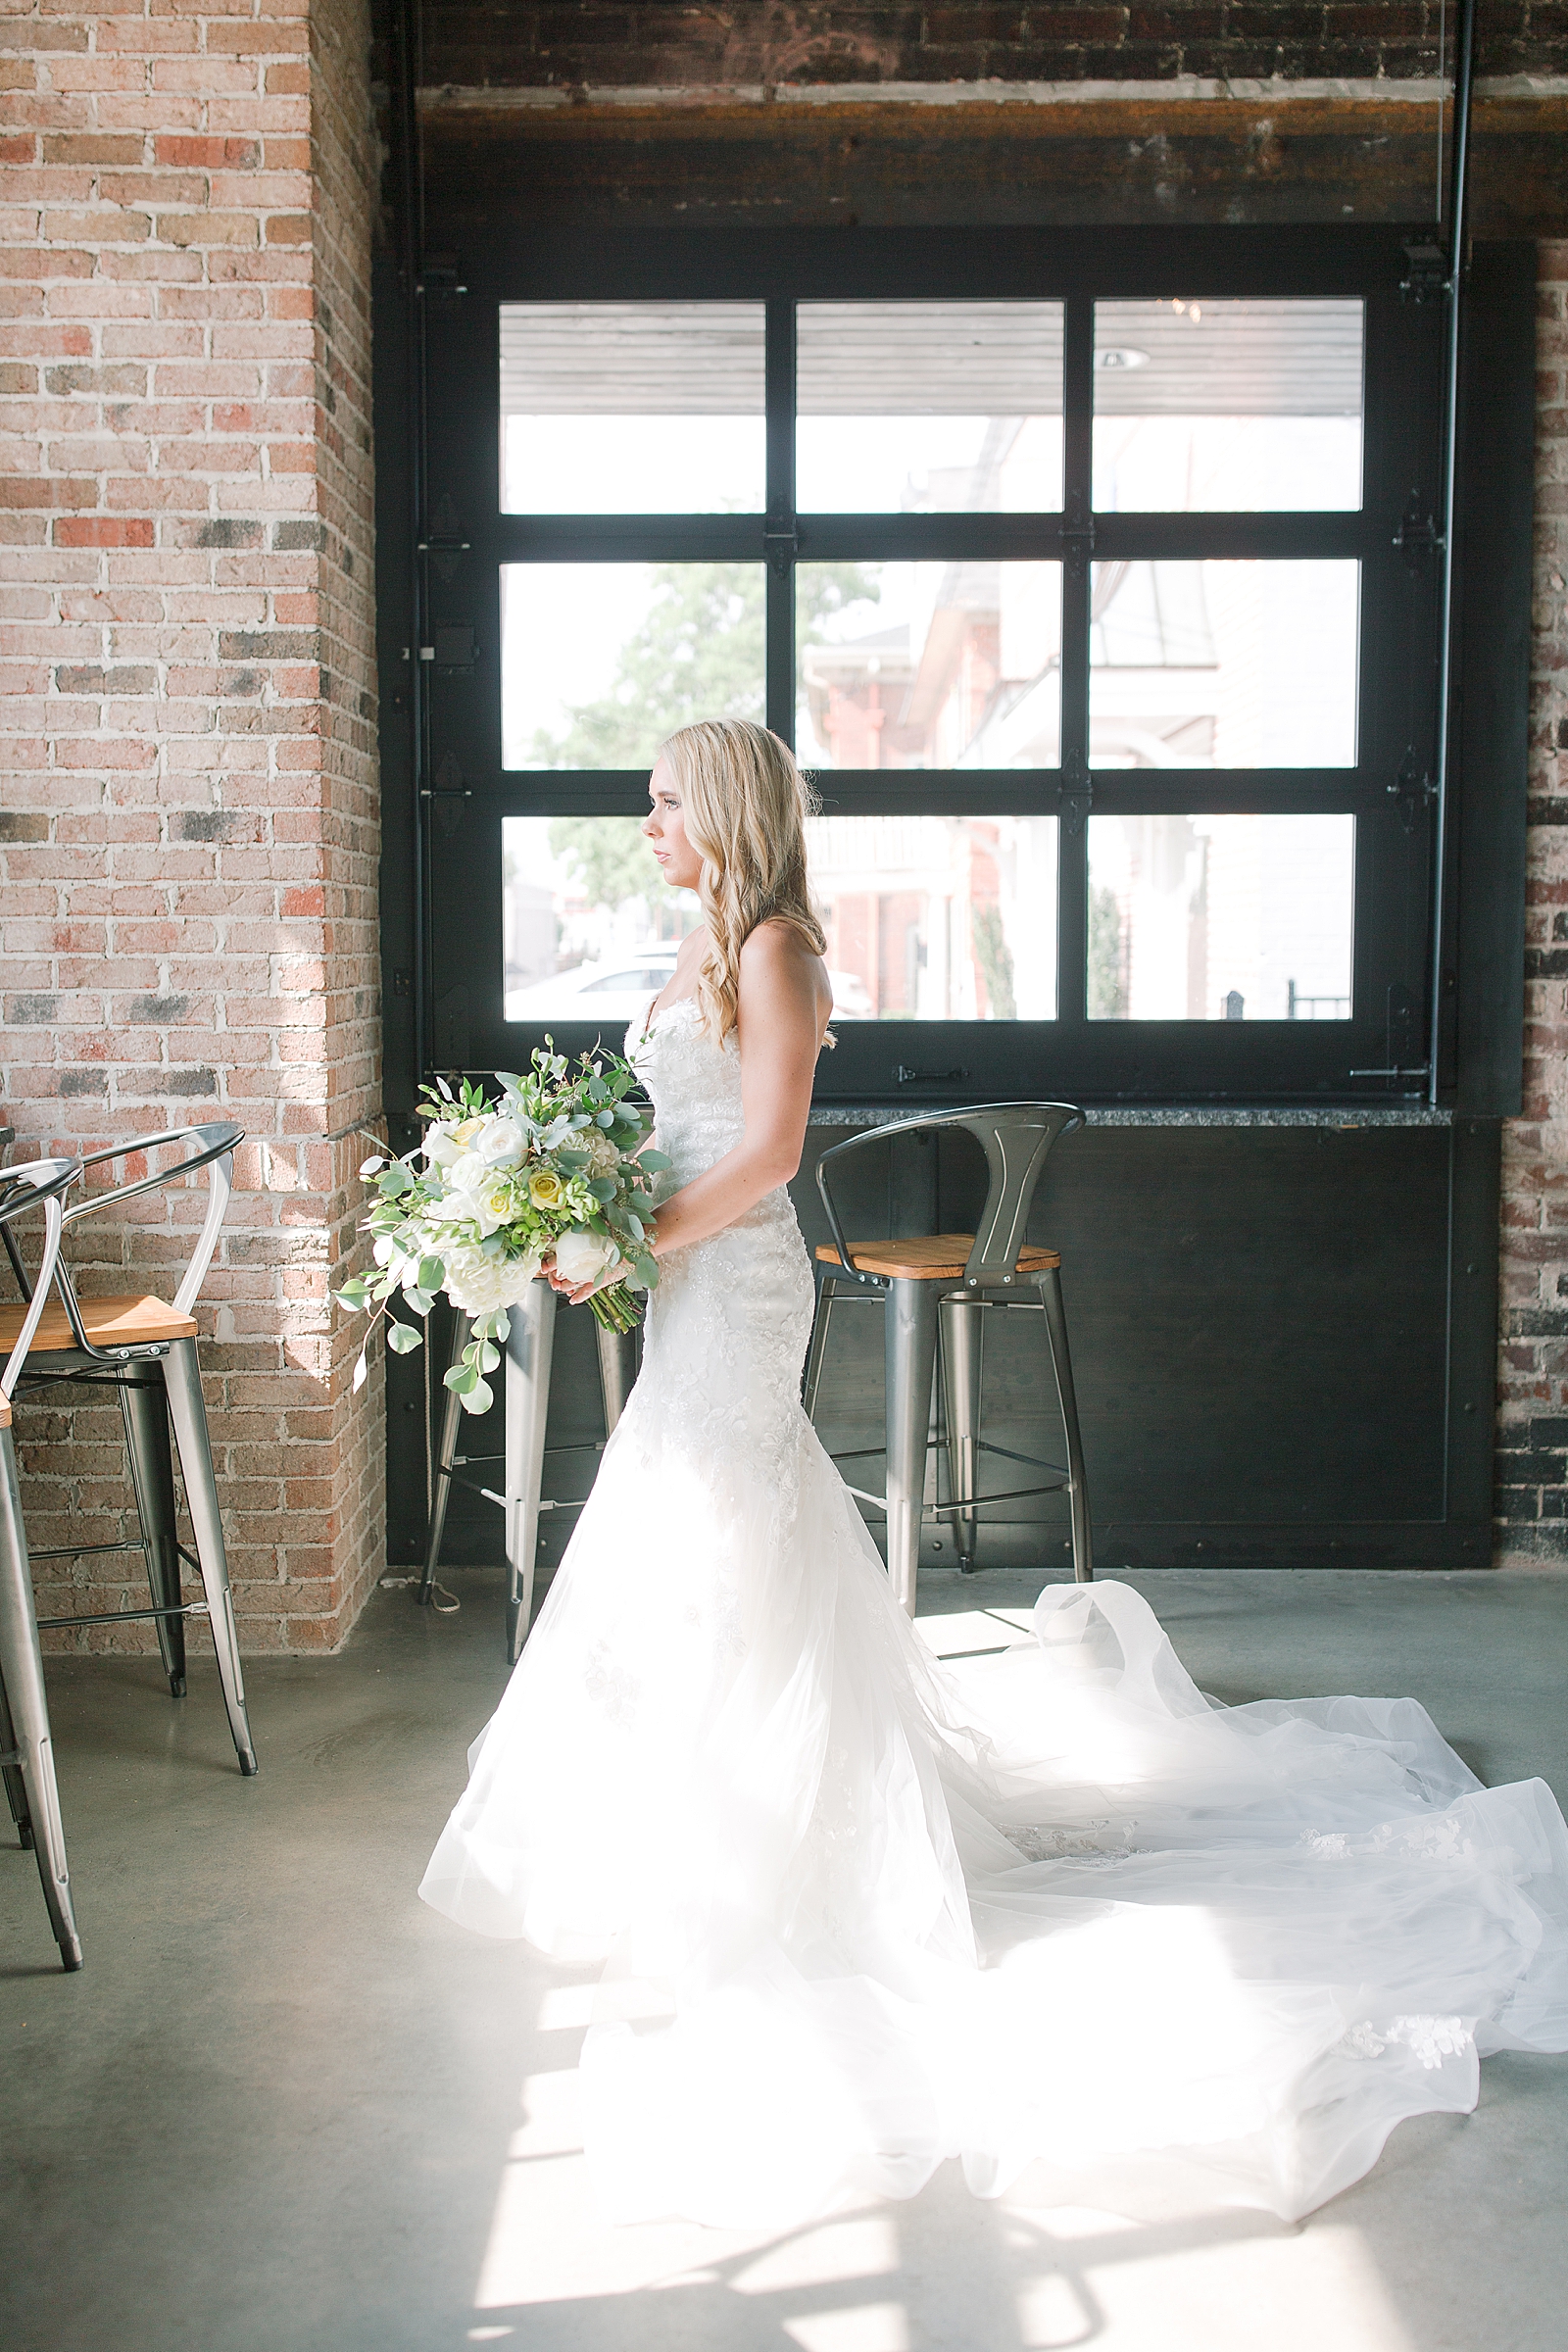 Glover Park Brewery Wedding Bride looking out brewery window Photo